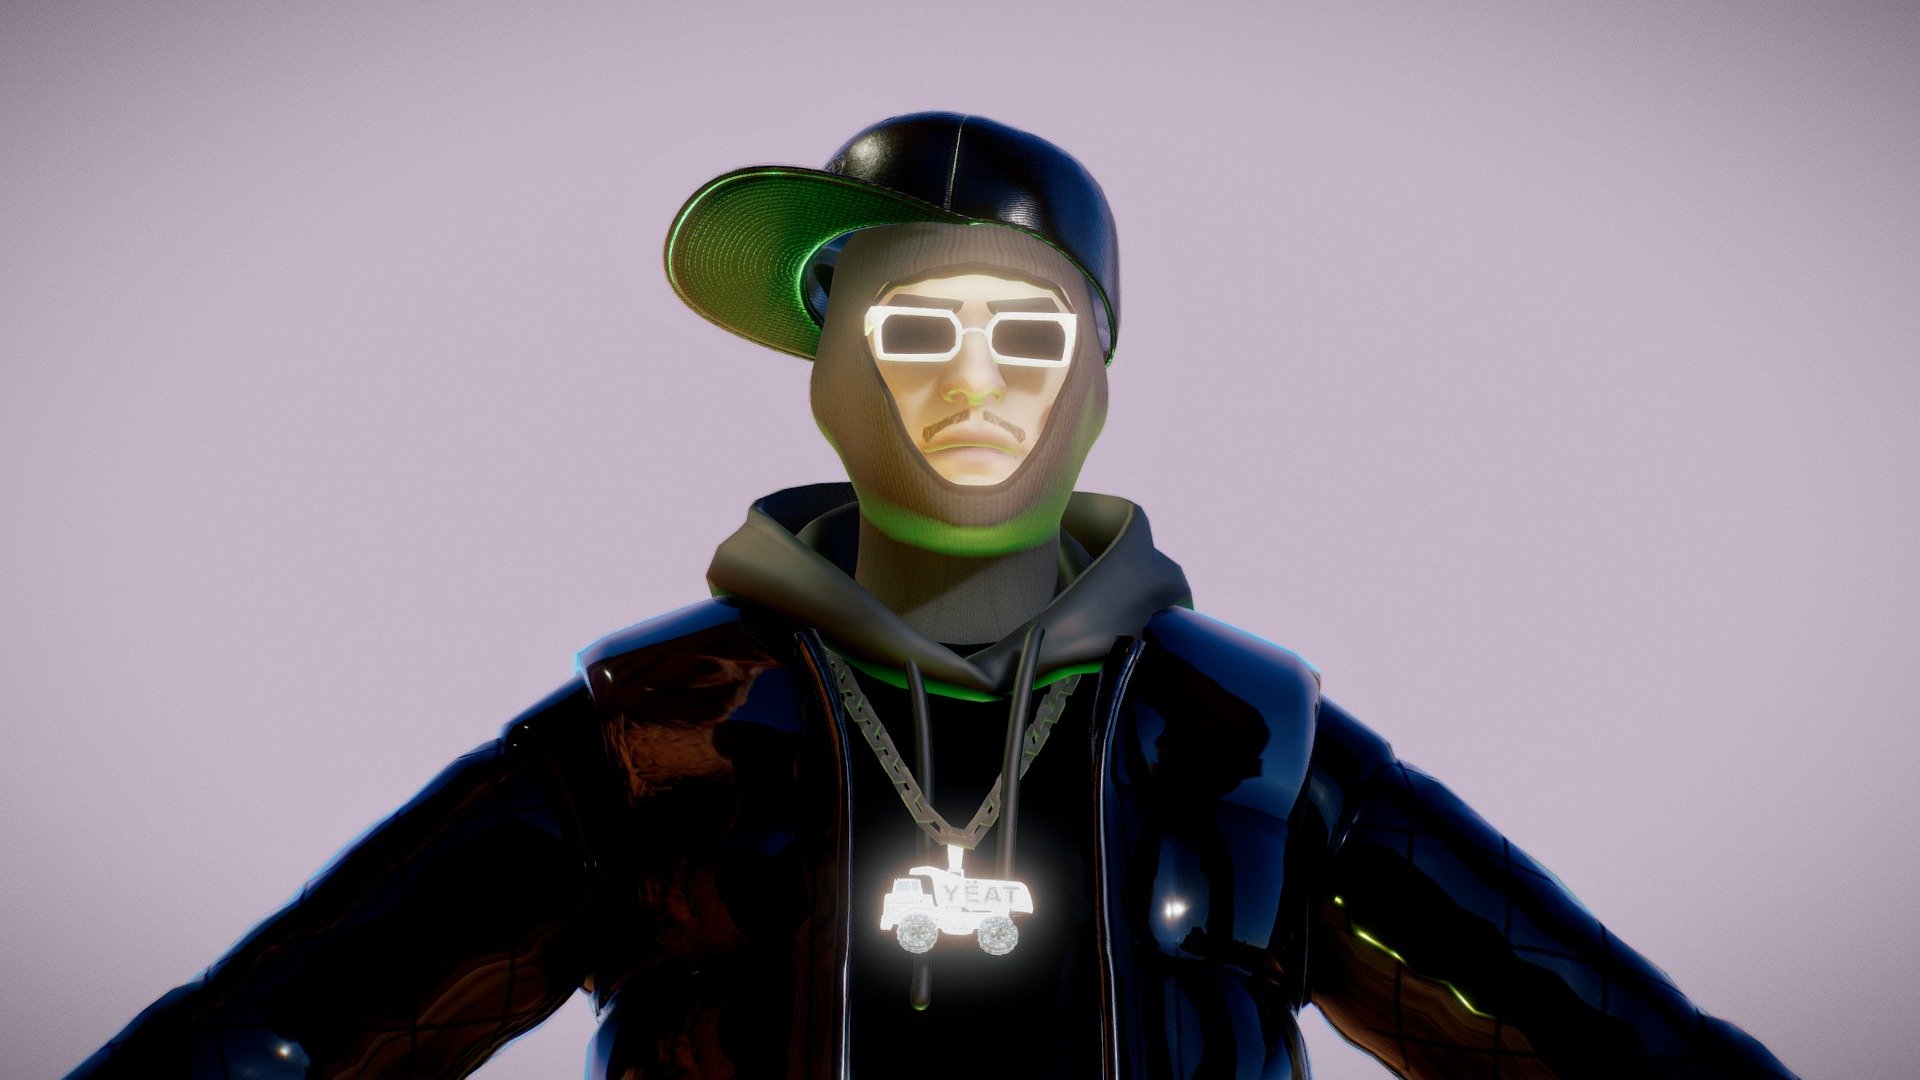 Custom Yeat Model but in the style of fortnite
Nothing much else to it 
Have fun with the model lol
Dont forget to credit your boy LateNightGameNight - Yeat Model but in Fortnite - Download Free 3D model by Latenightgamenight 3d model